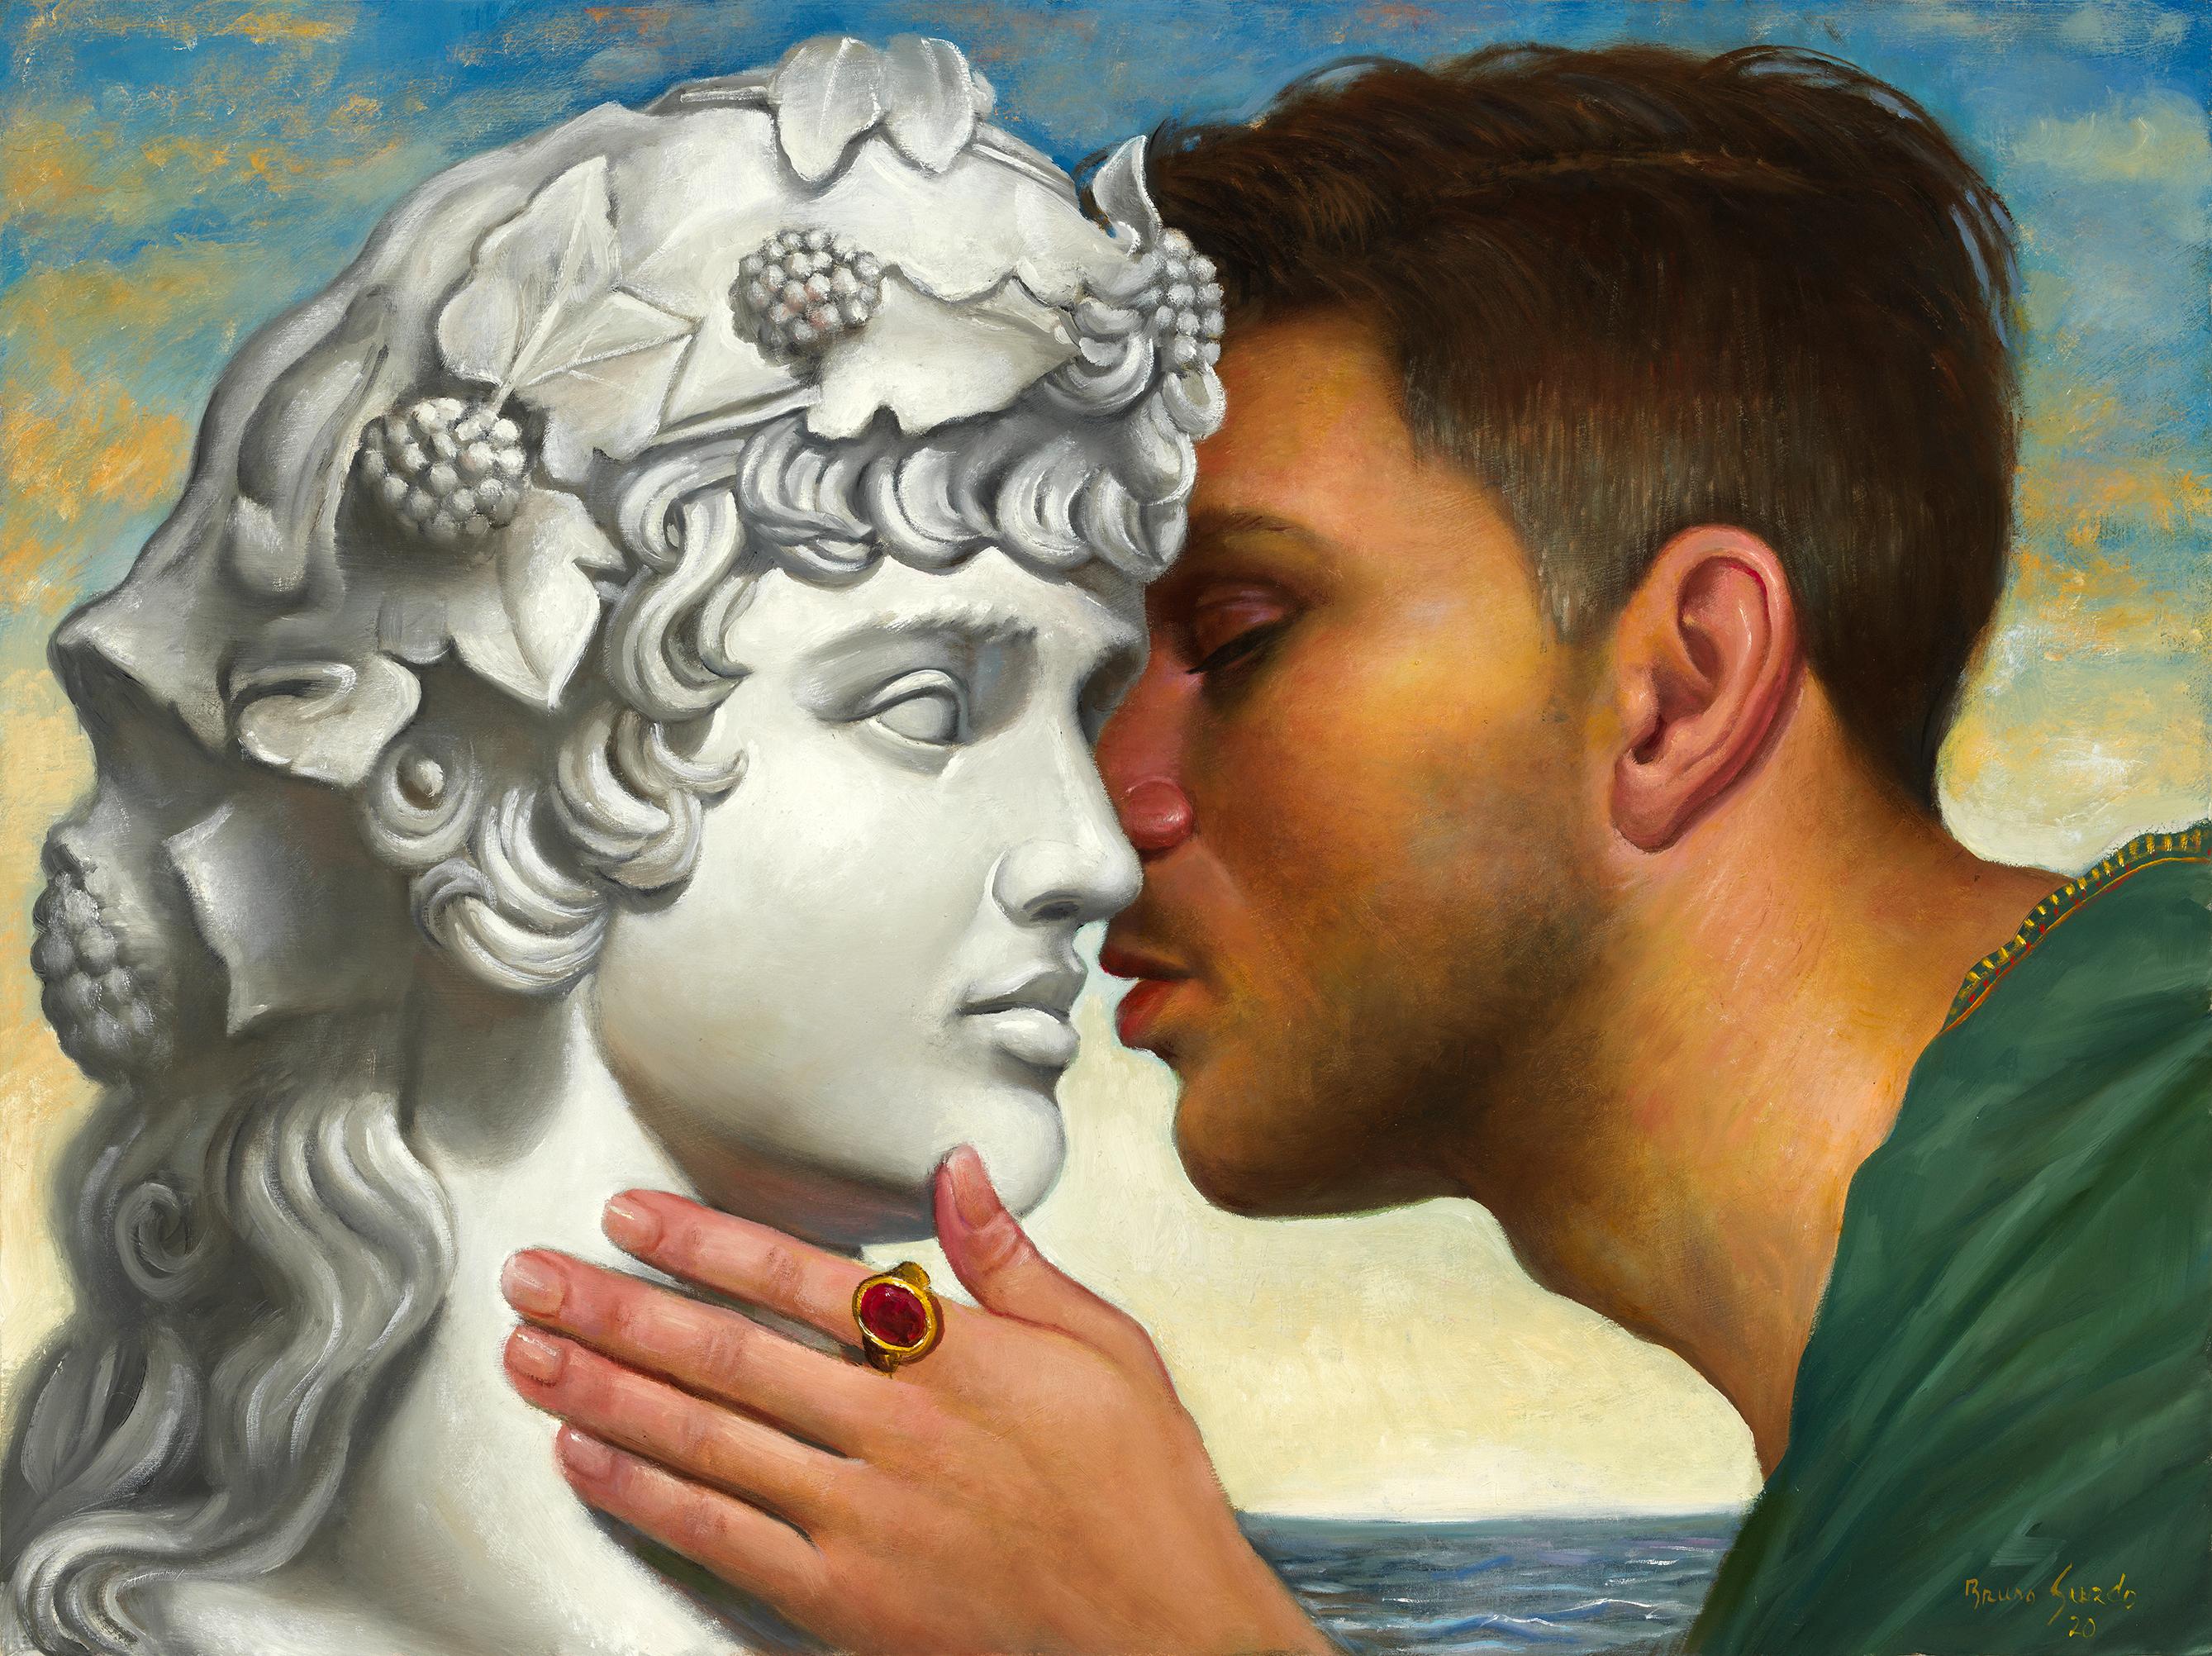 Portrait Painting Bruno Surdo - « The Hidden Love of Hadrian and Antinous:: Male Embracing a Statue »:: huile sur toile:: homme embrassant une statue